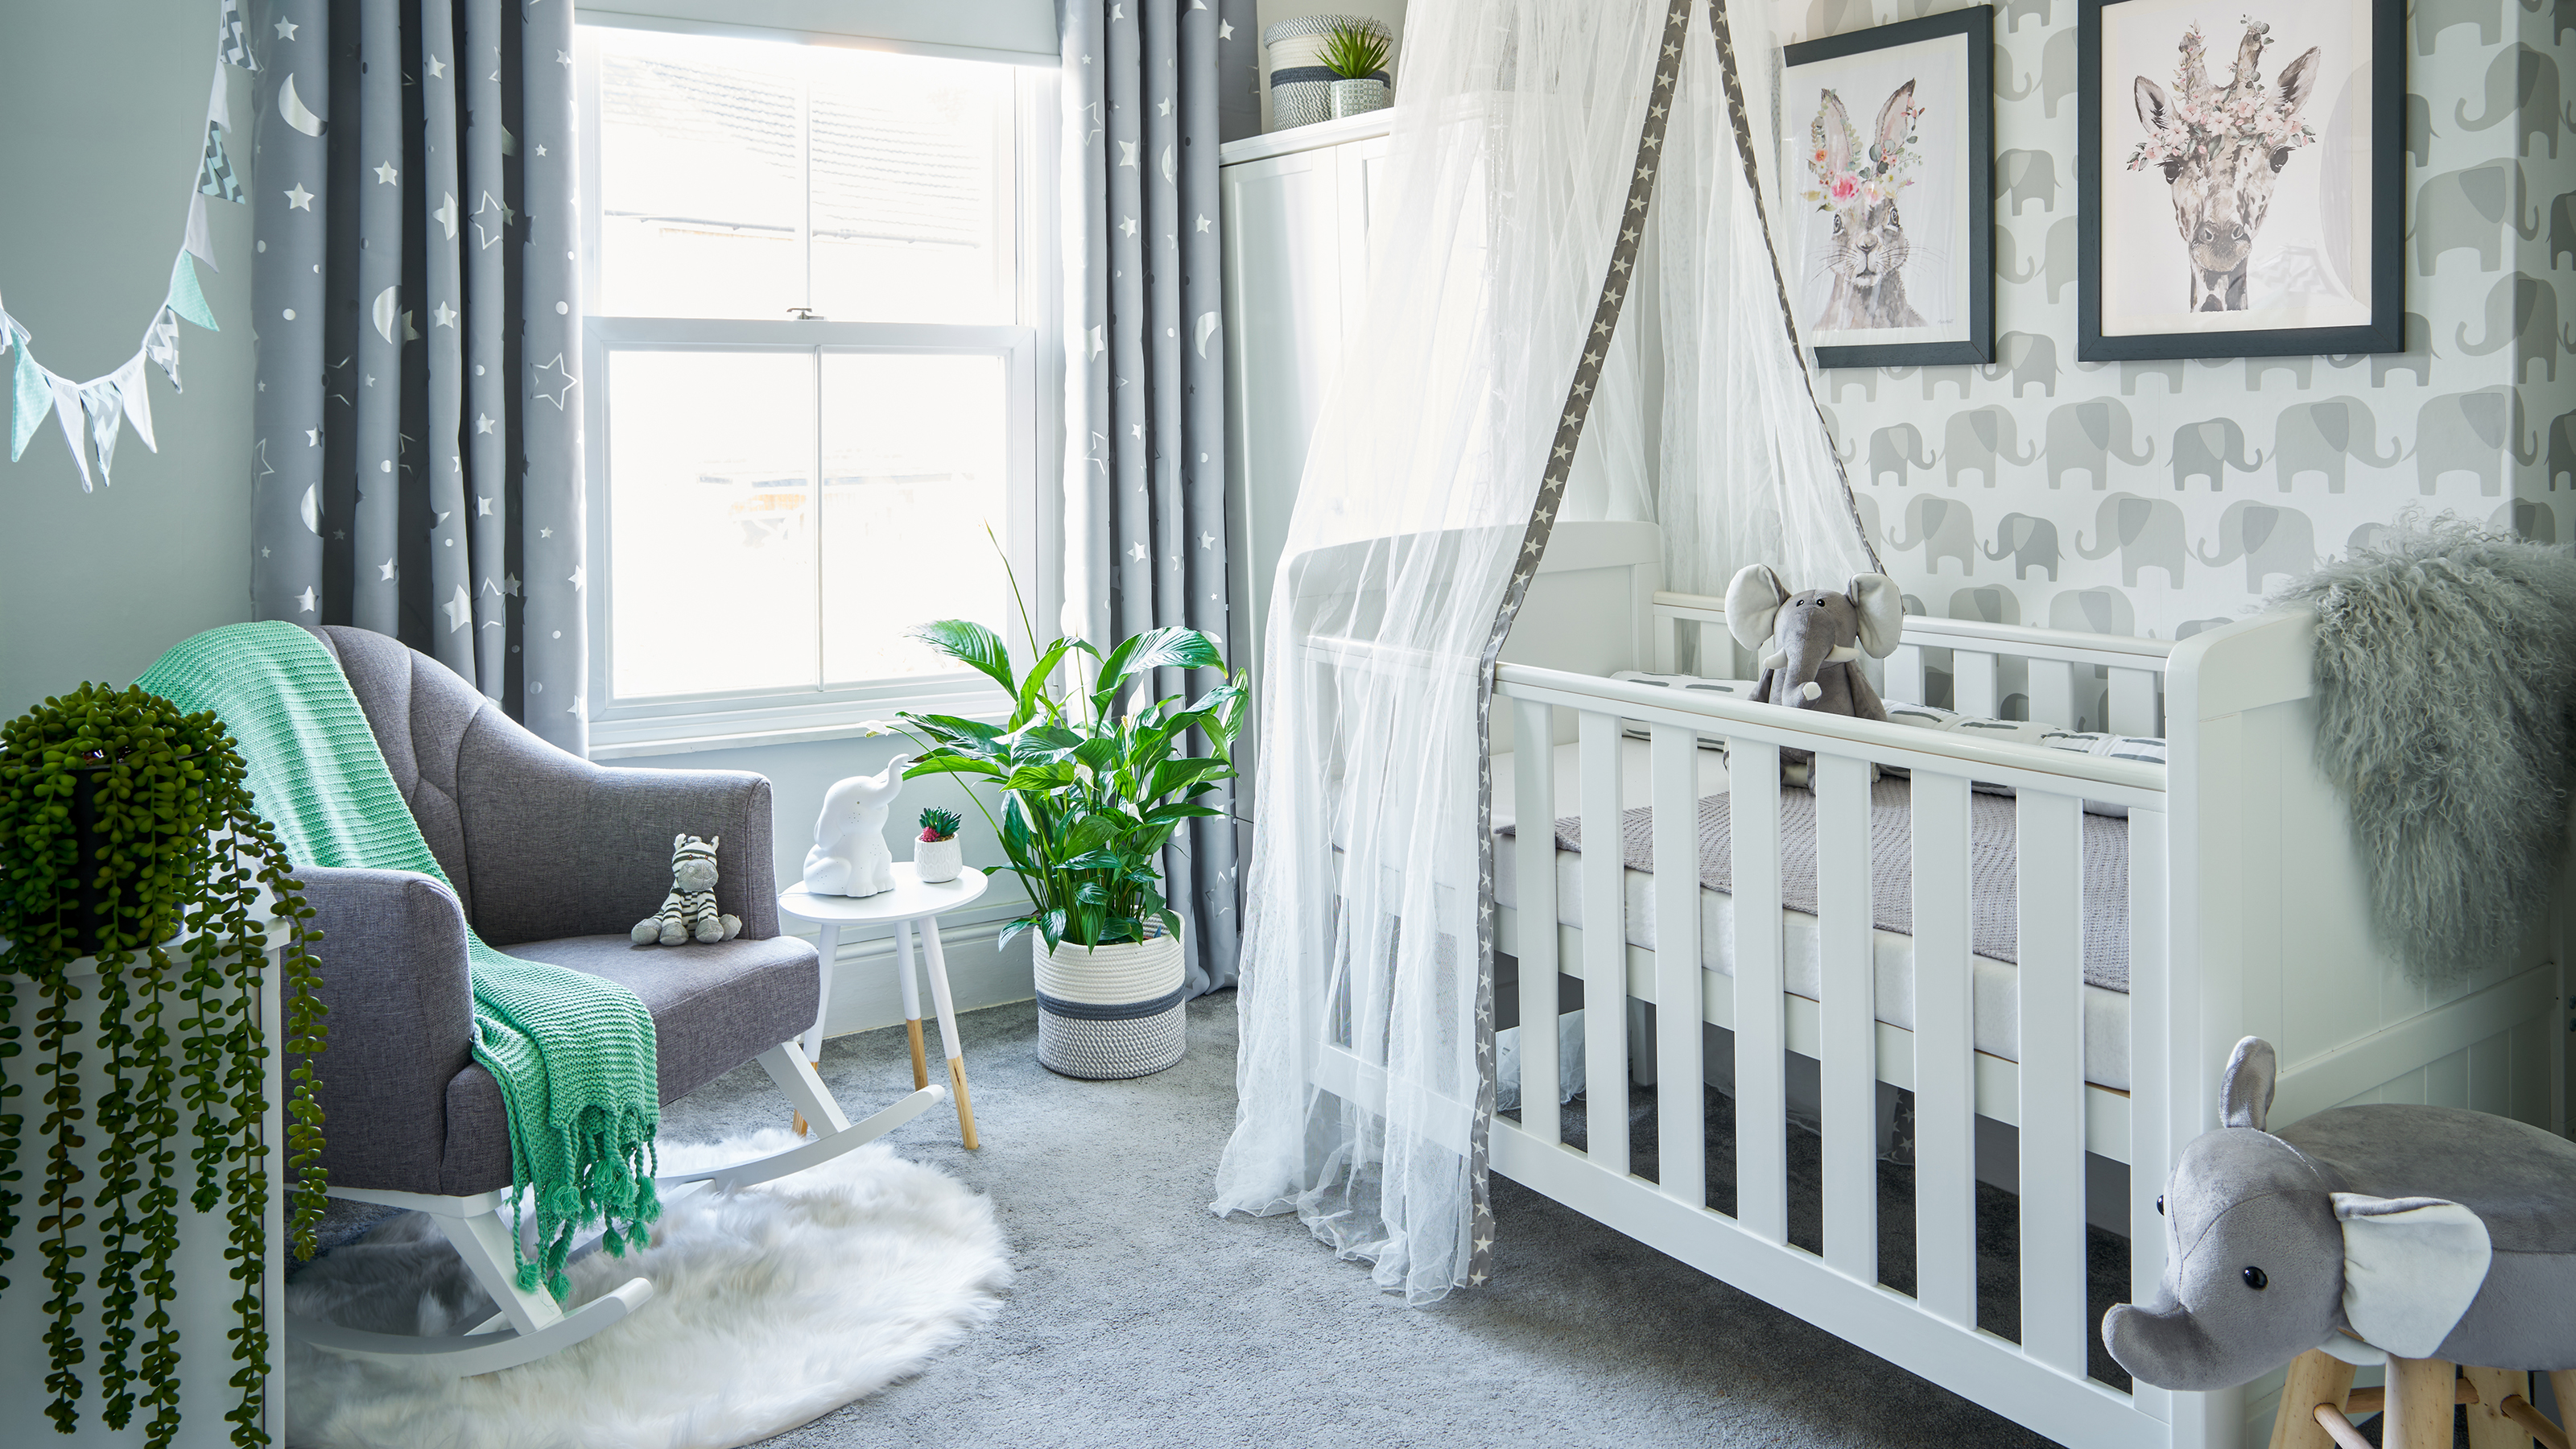 gender-neutral nursery ideas: 16 universal designs for babies and